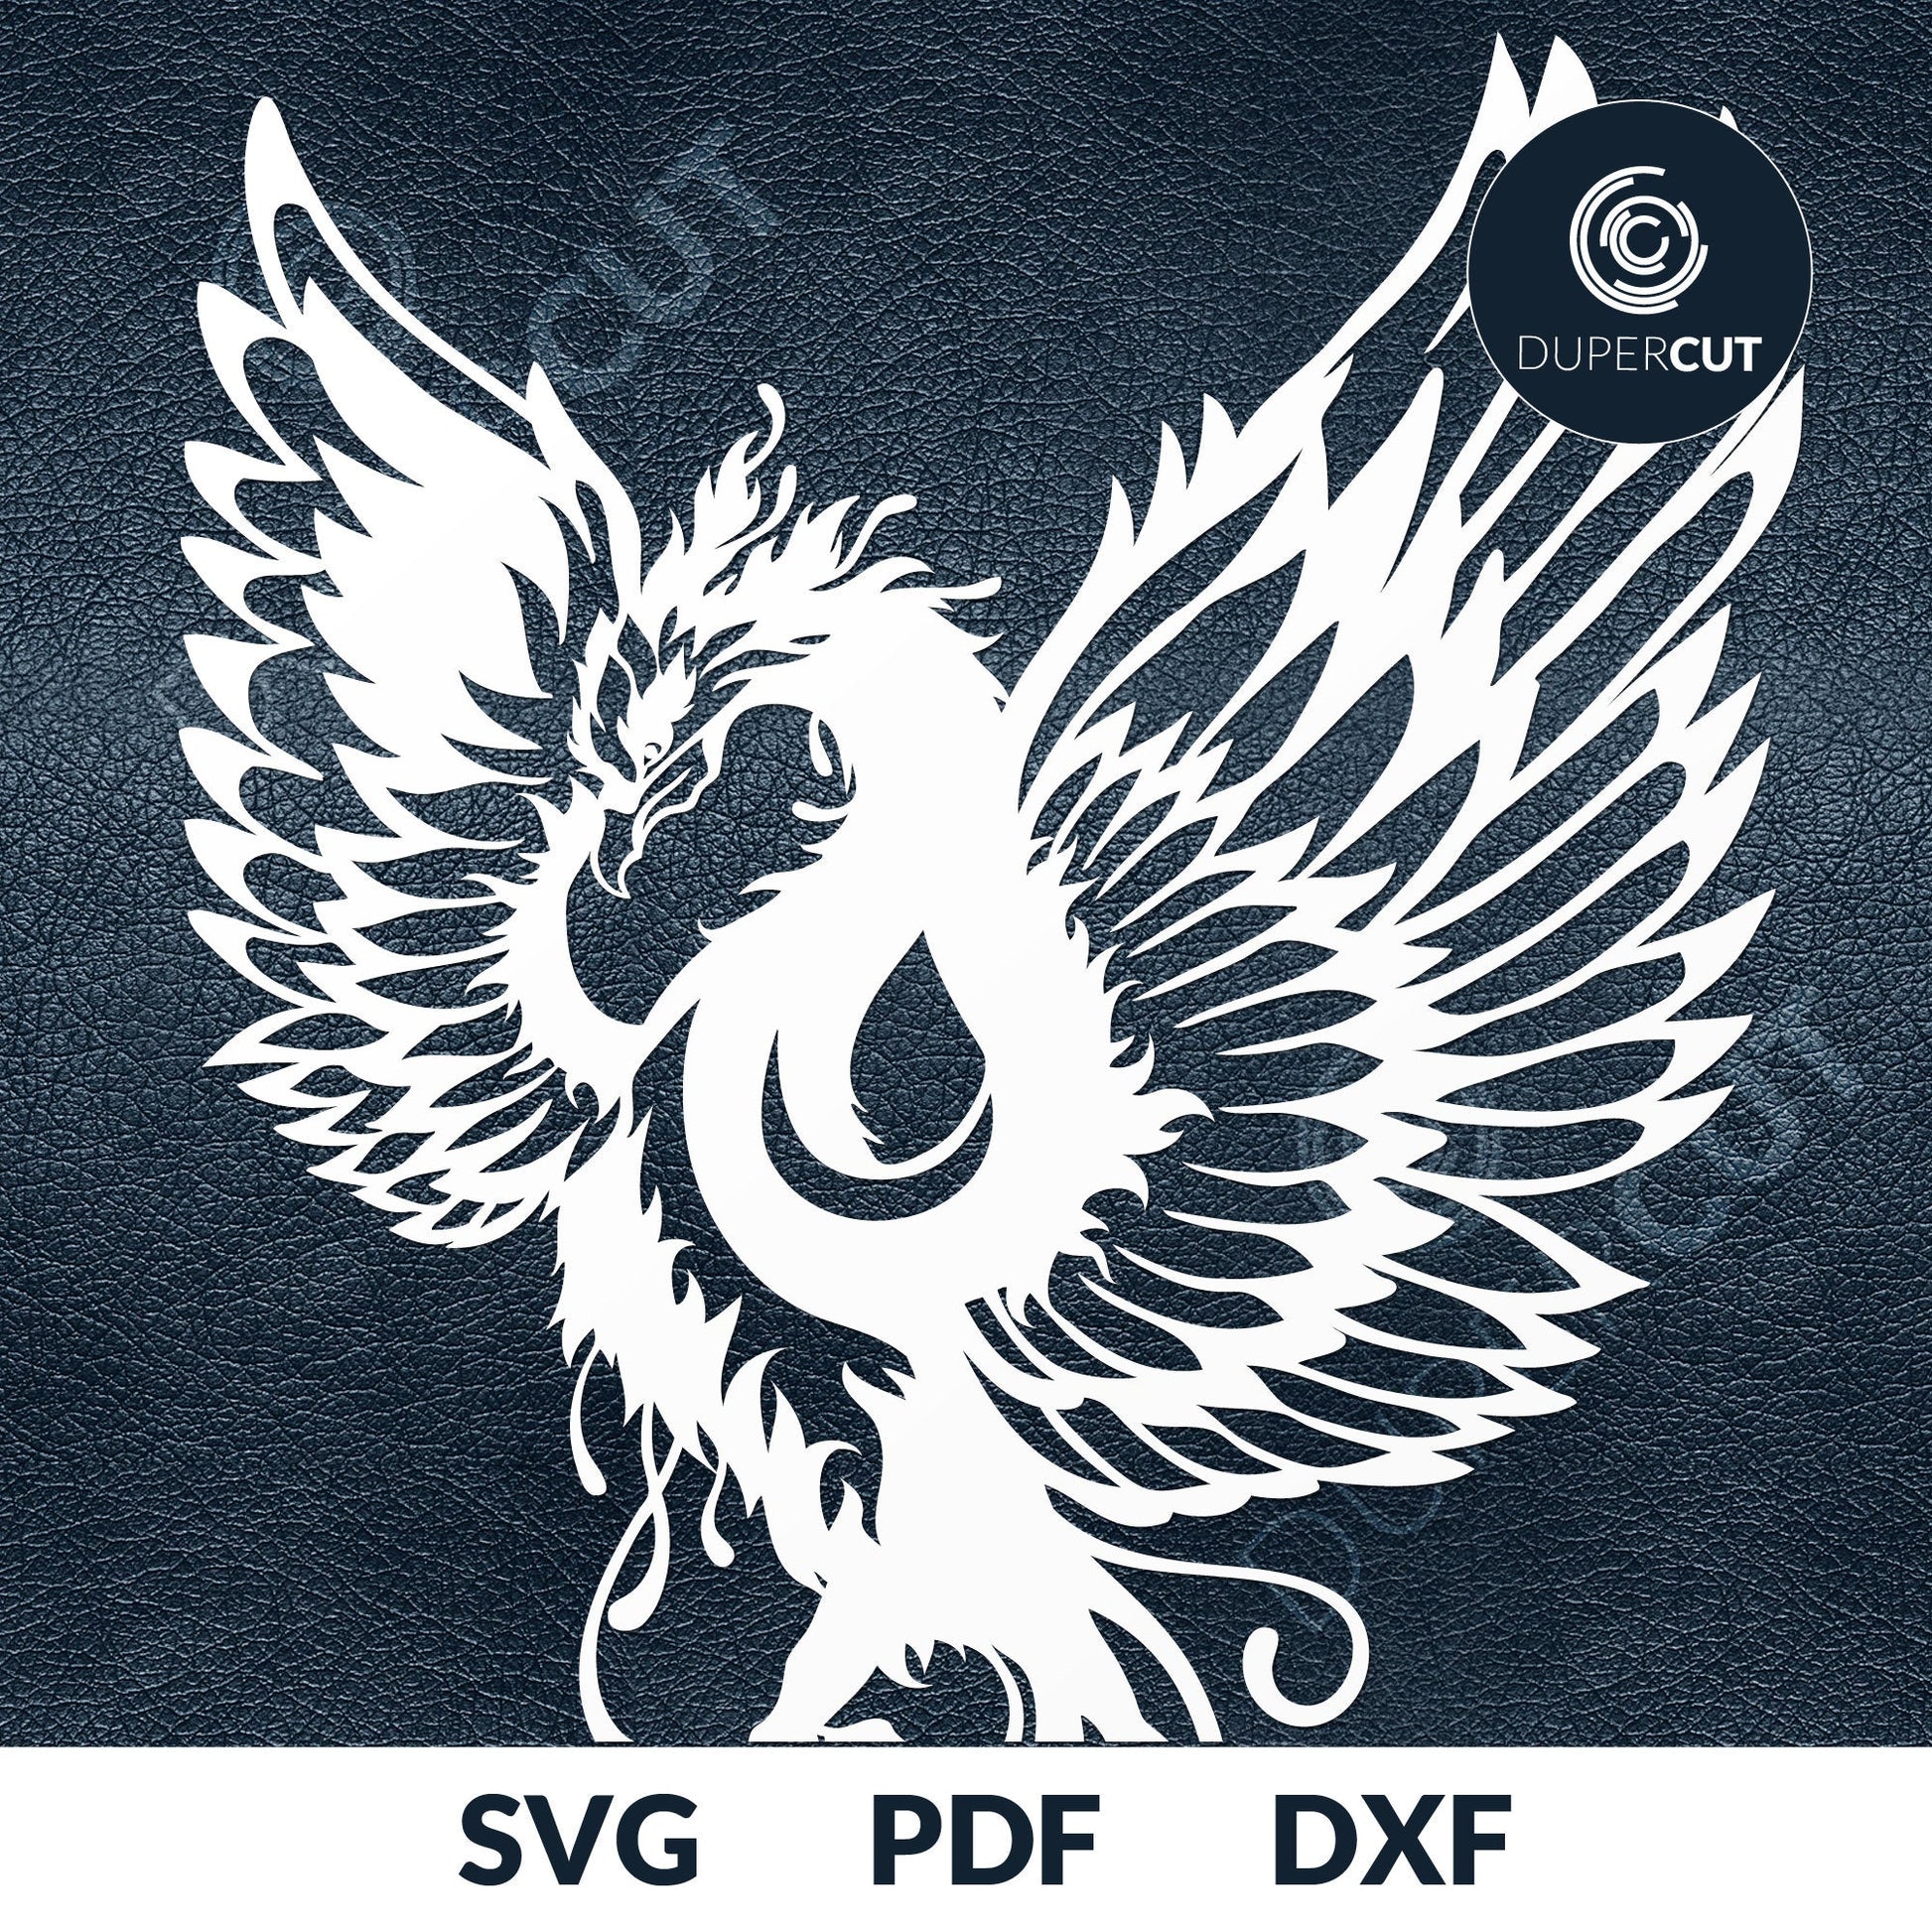 Phoenix cutting template for wood and vinyl  - SVG DXF JPEG files for CNC machines, laser cutting, Cricut, Silhouette Cameo, Glowforge engraving